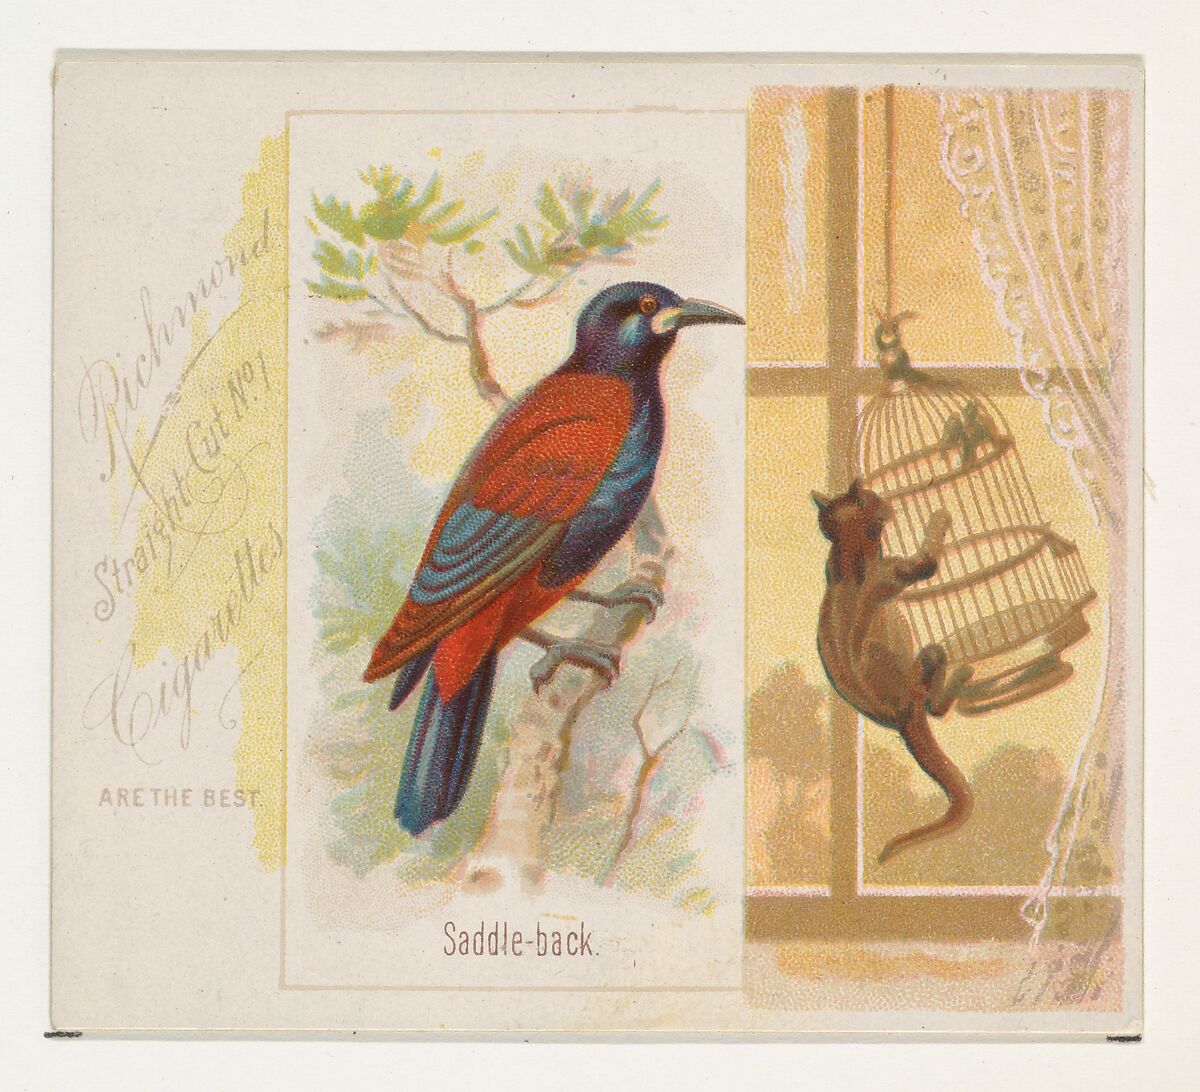 Saddle-back, from the Song Birds of the World series (N42) for Allen & Ginter Cigarettes, Issued by Allen &amp; Ginter (American, Richmond, Virginia), Commercial color lithograph 